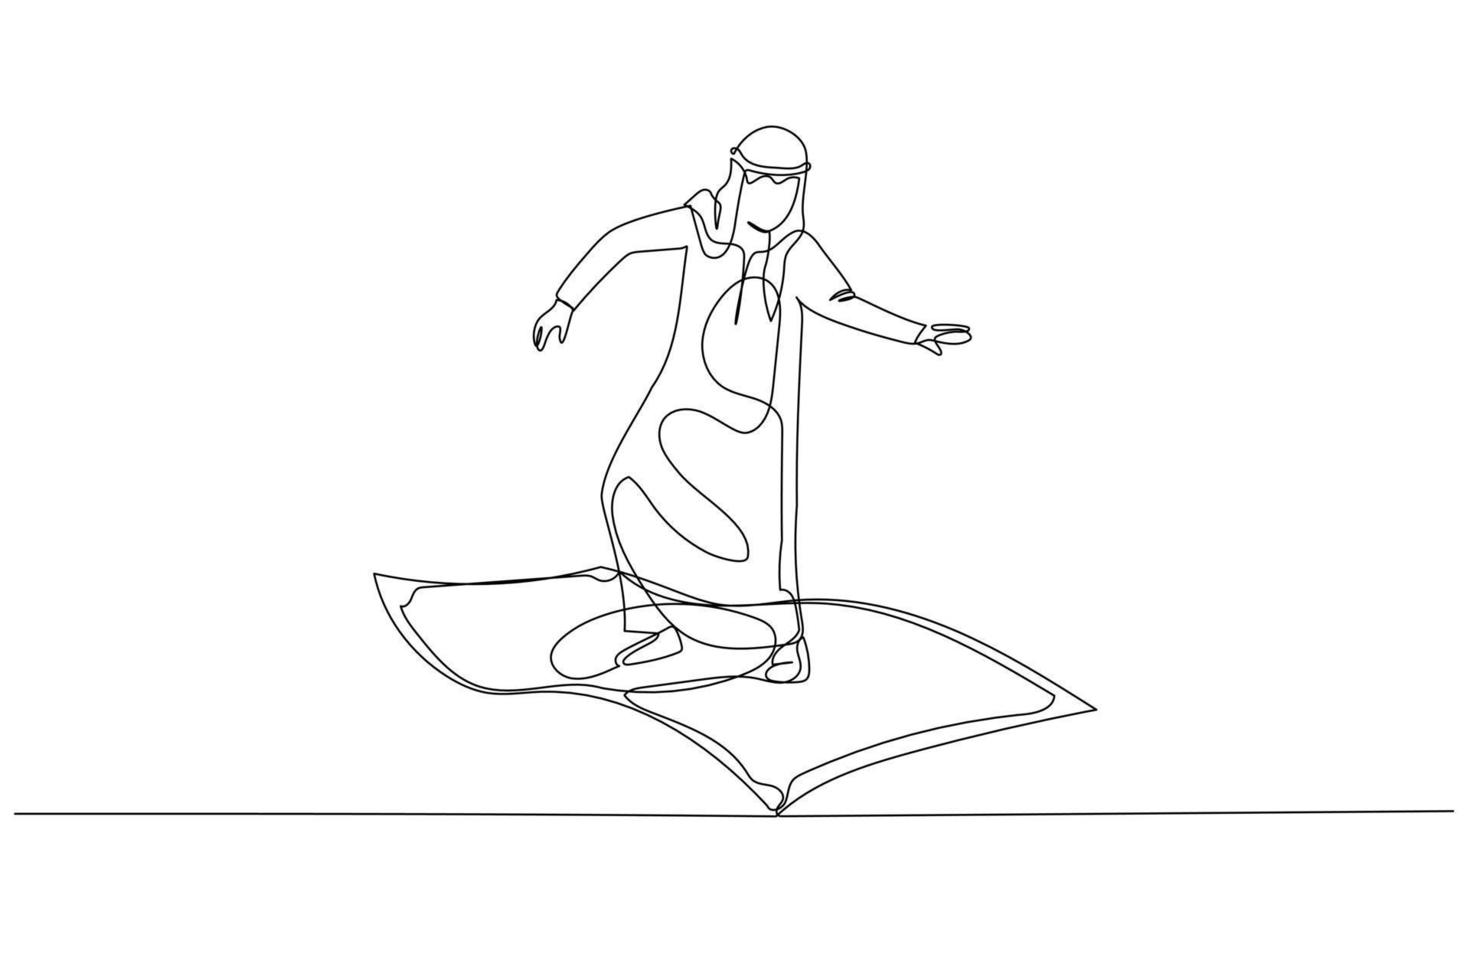 Drawing of arab businessman riding flying money. metaphor for profit. Single line art style vector